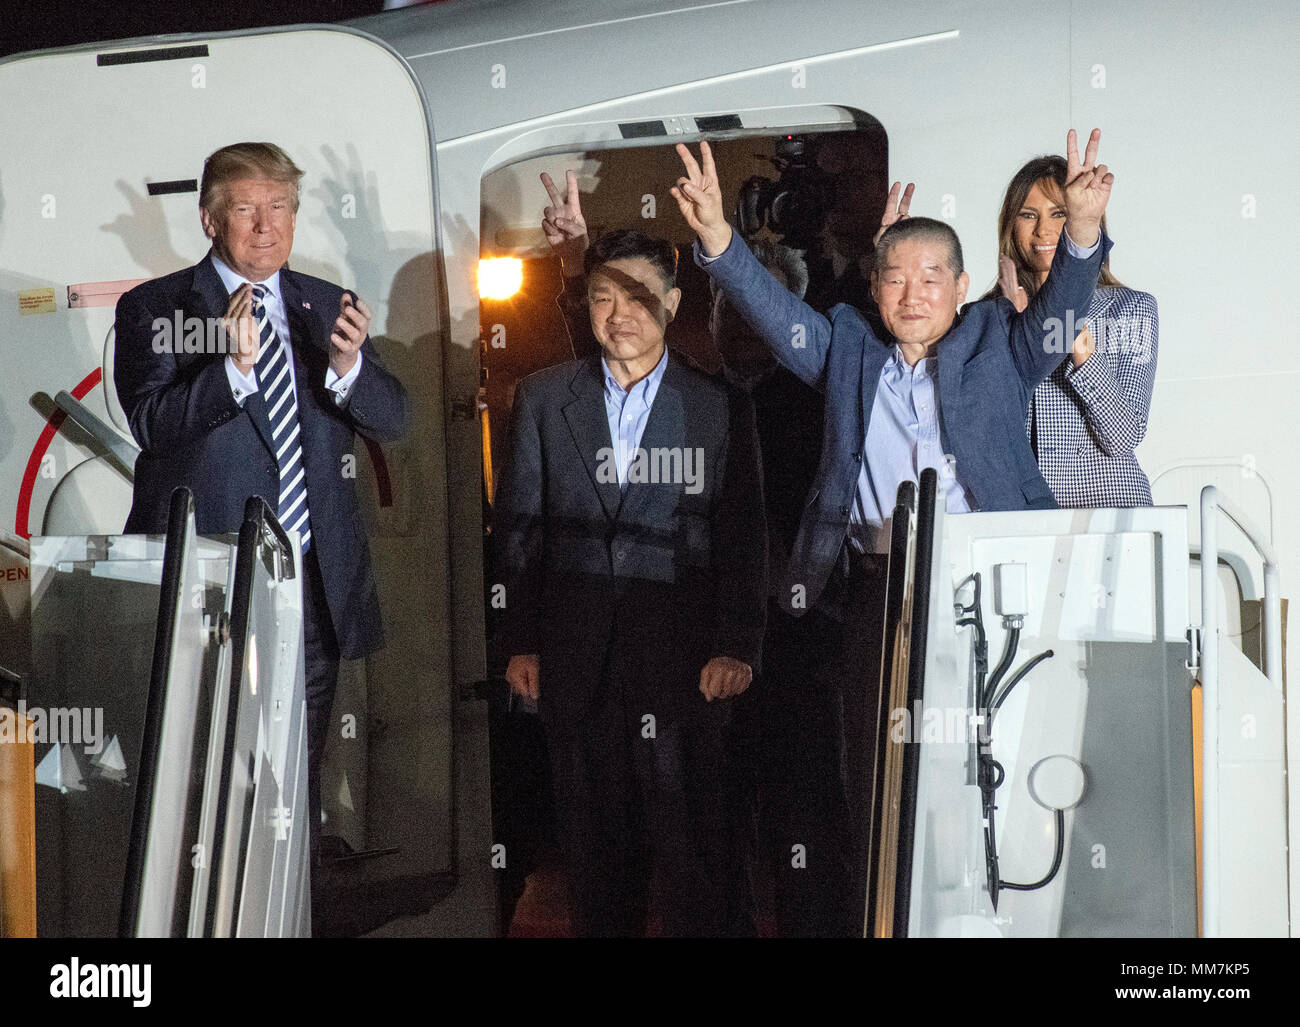 United States President Donald J. Trump welcomes Kim Dong Chul, Kim Hak Song and Tony Kim back to the US at Joint Base Andrews in Maryland on Thursday, May 10, 2018. The three men were imprisoned in North Korea for periods ranging from one and two years. They were released to US Secretary of State Mike Pompeo as a good-will gesture in the lead-up to the talks between President Trump and North Korean leader Kim Jong Un. Credit: Ron Sachs/CNP /MediaPunch Stock Photo